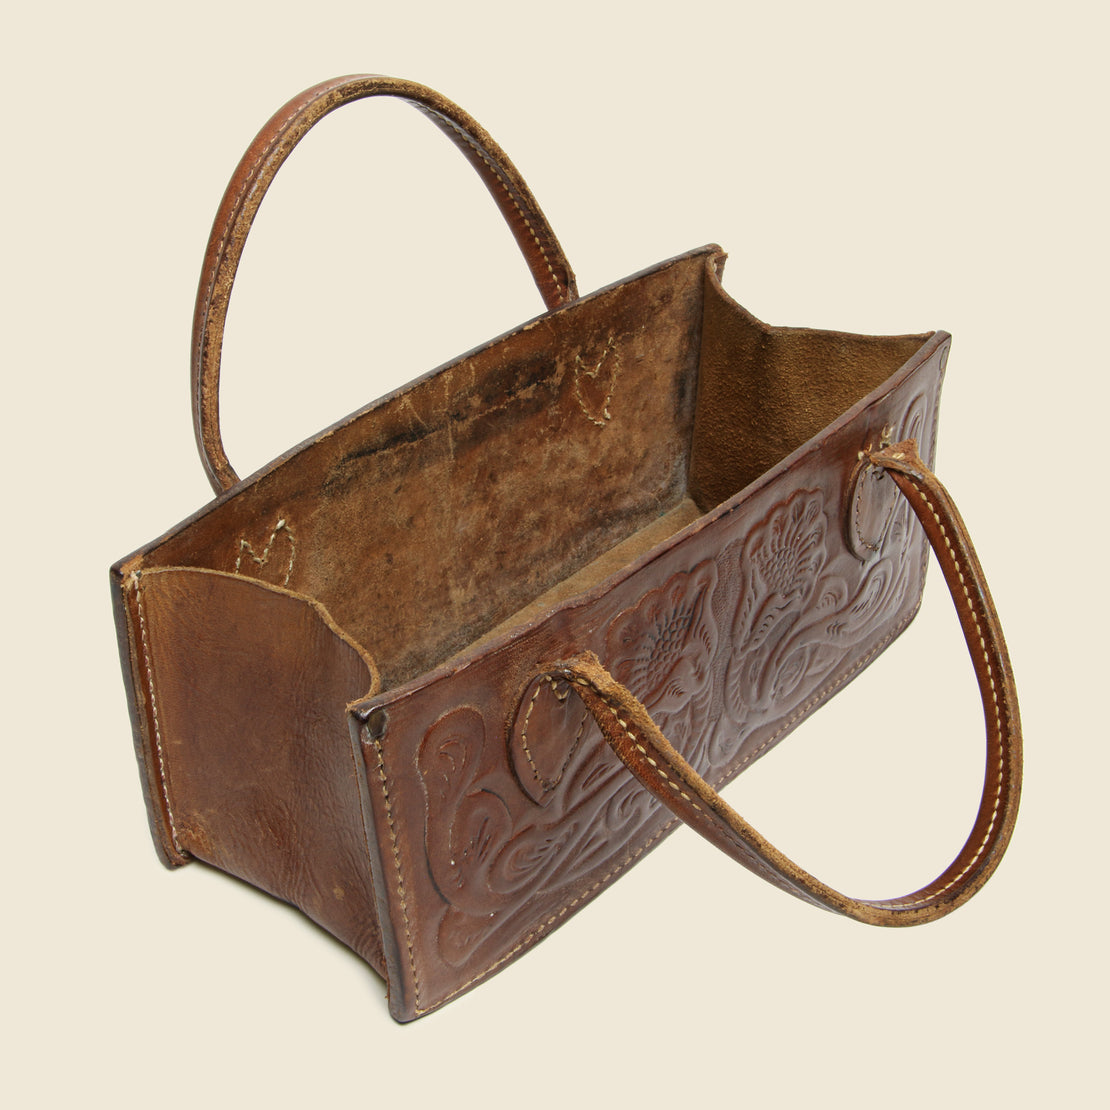 Tooled Leather Bag - Brown